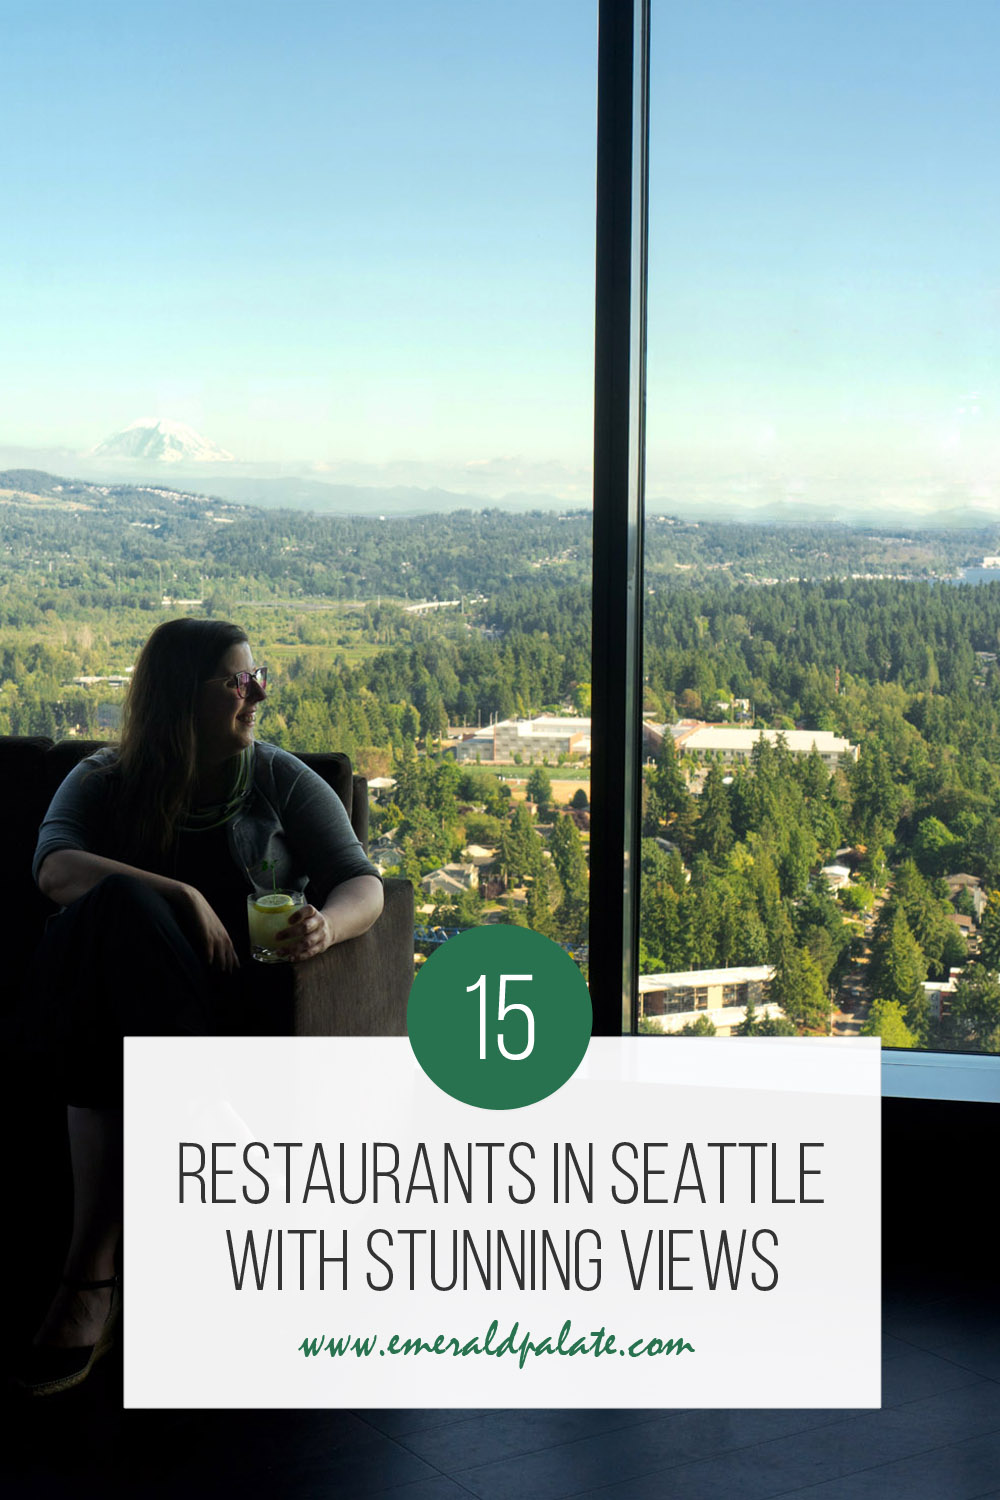 Restaurants in Seattle with stunning views AND good food